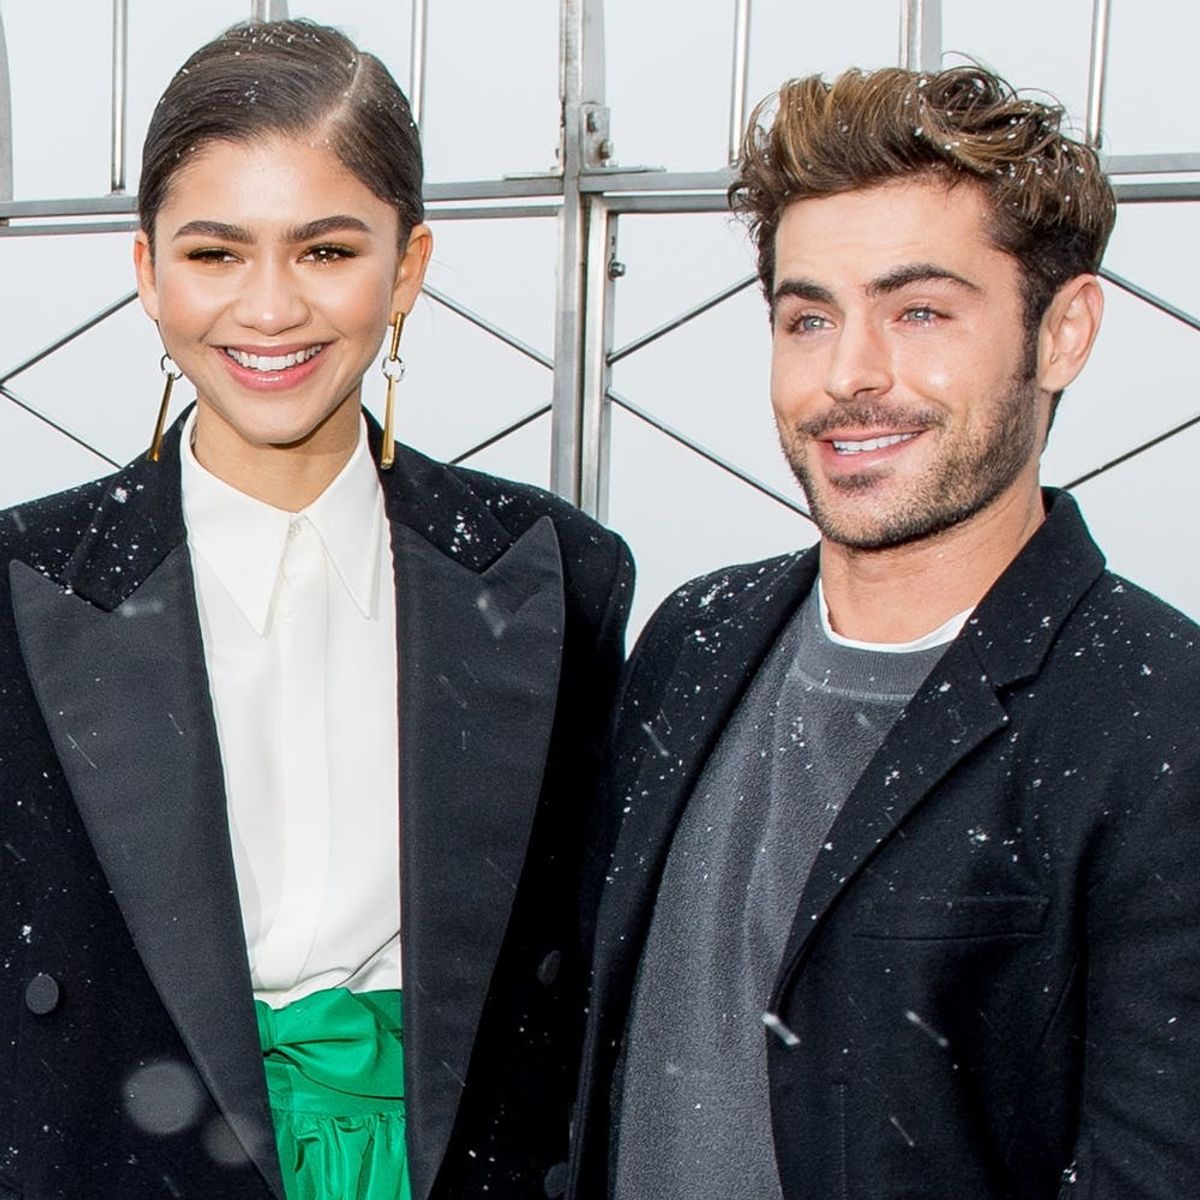 Zac Efron and Zendaya Suffered a Trapeze Collision While Filming ‘The Greatest Showman’ and Ouch